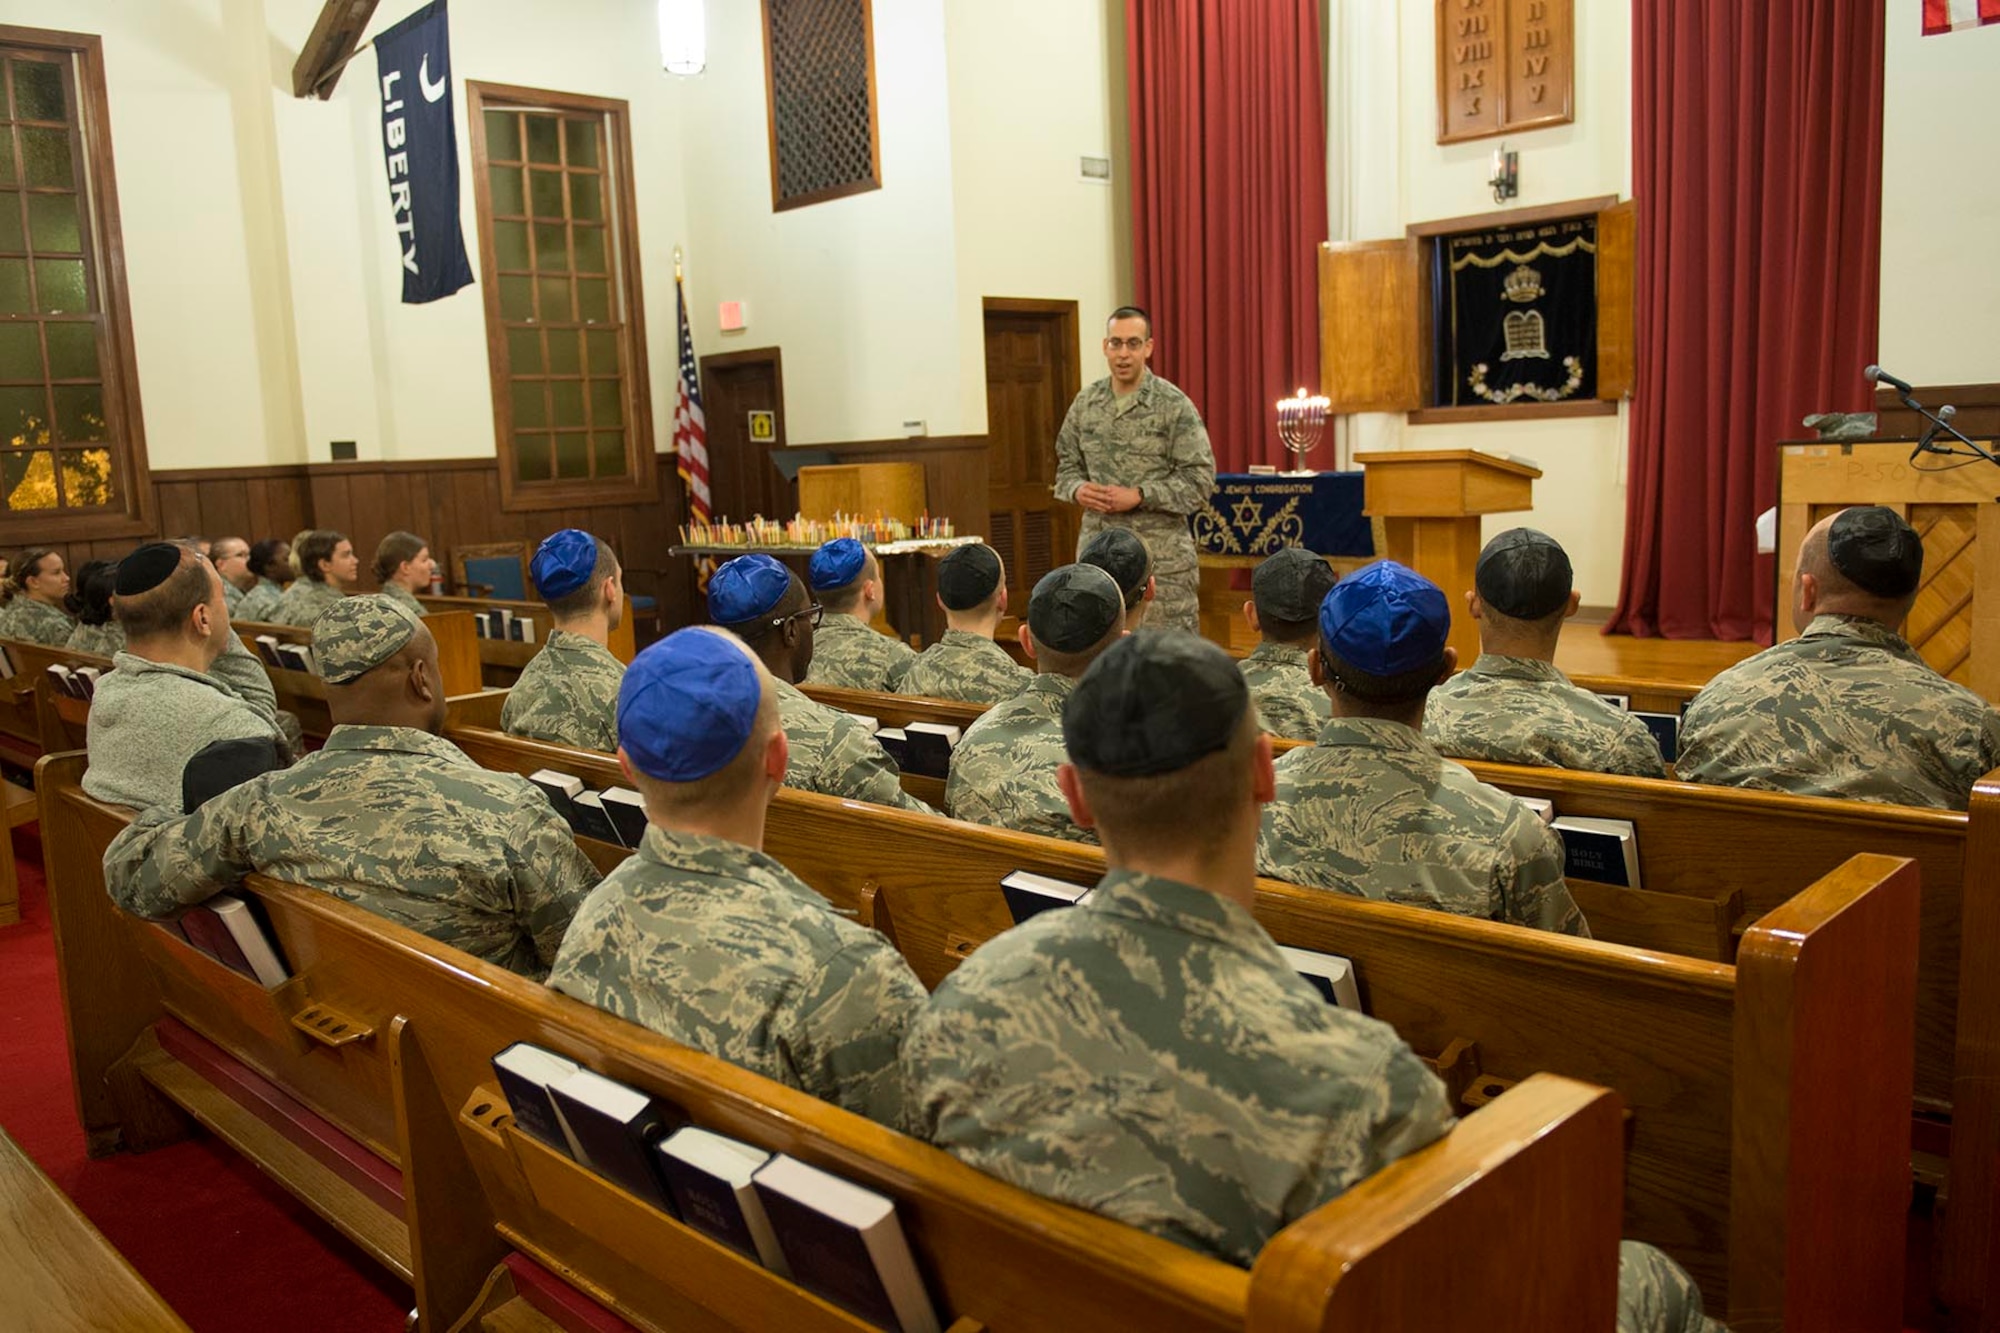 Chaplain Kahan, 502nd Air Base Wing Jewish chaplain, speaks to the congregation Dec. 13, 2015. The 502nd Air Base Wing Chaplain’s Office gives Airmen in basic training and technical school the opportunity to attend the traditional ceremony and enjoy traditional Hanukkah refreshments and activities afterward. Hanukkah, which is celebrated this year from sundown Dec. 24 to sundown Jan. 1, is known as the Festival of Lights. (Courtesy Photo)